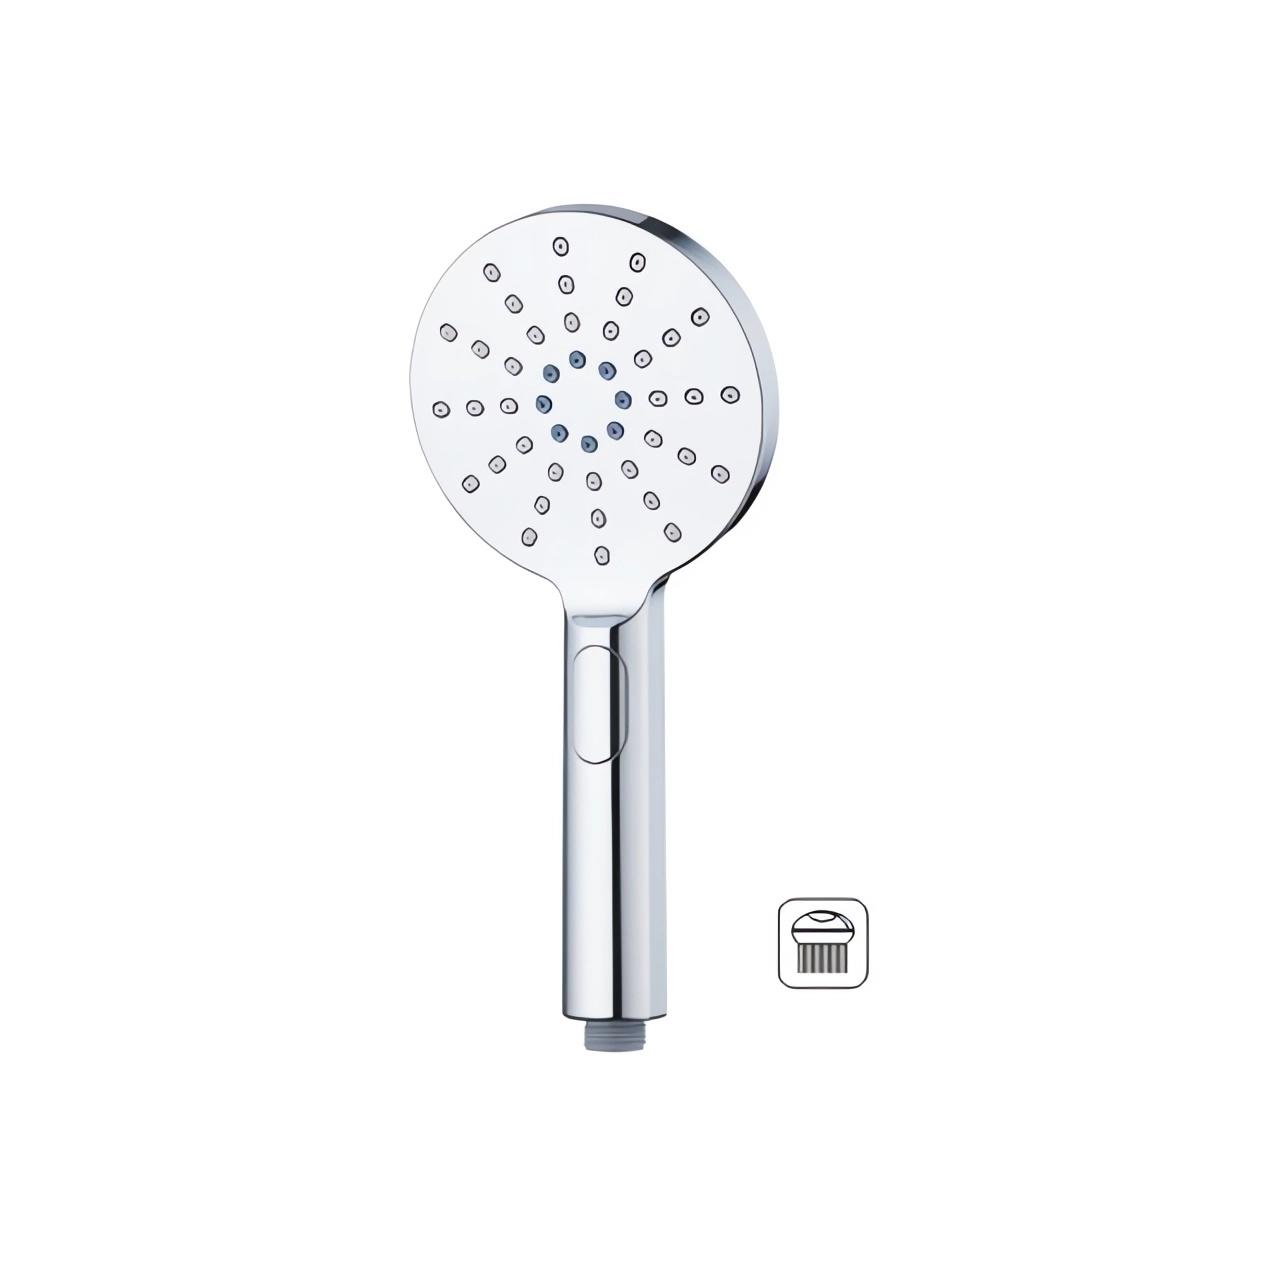 How can users troubleshoot common issues such as low water pressure or clogging in their bathroom shower head?